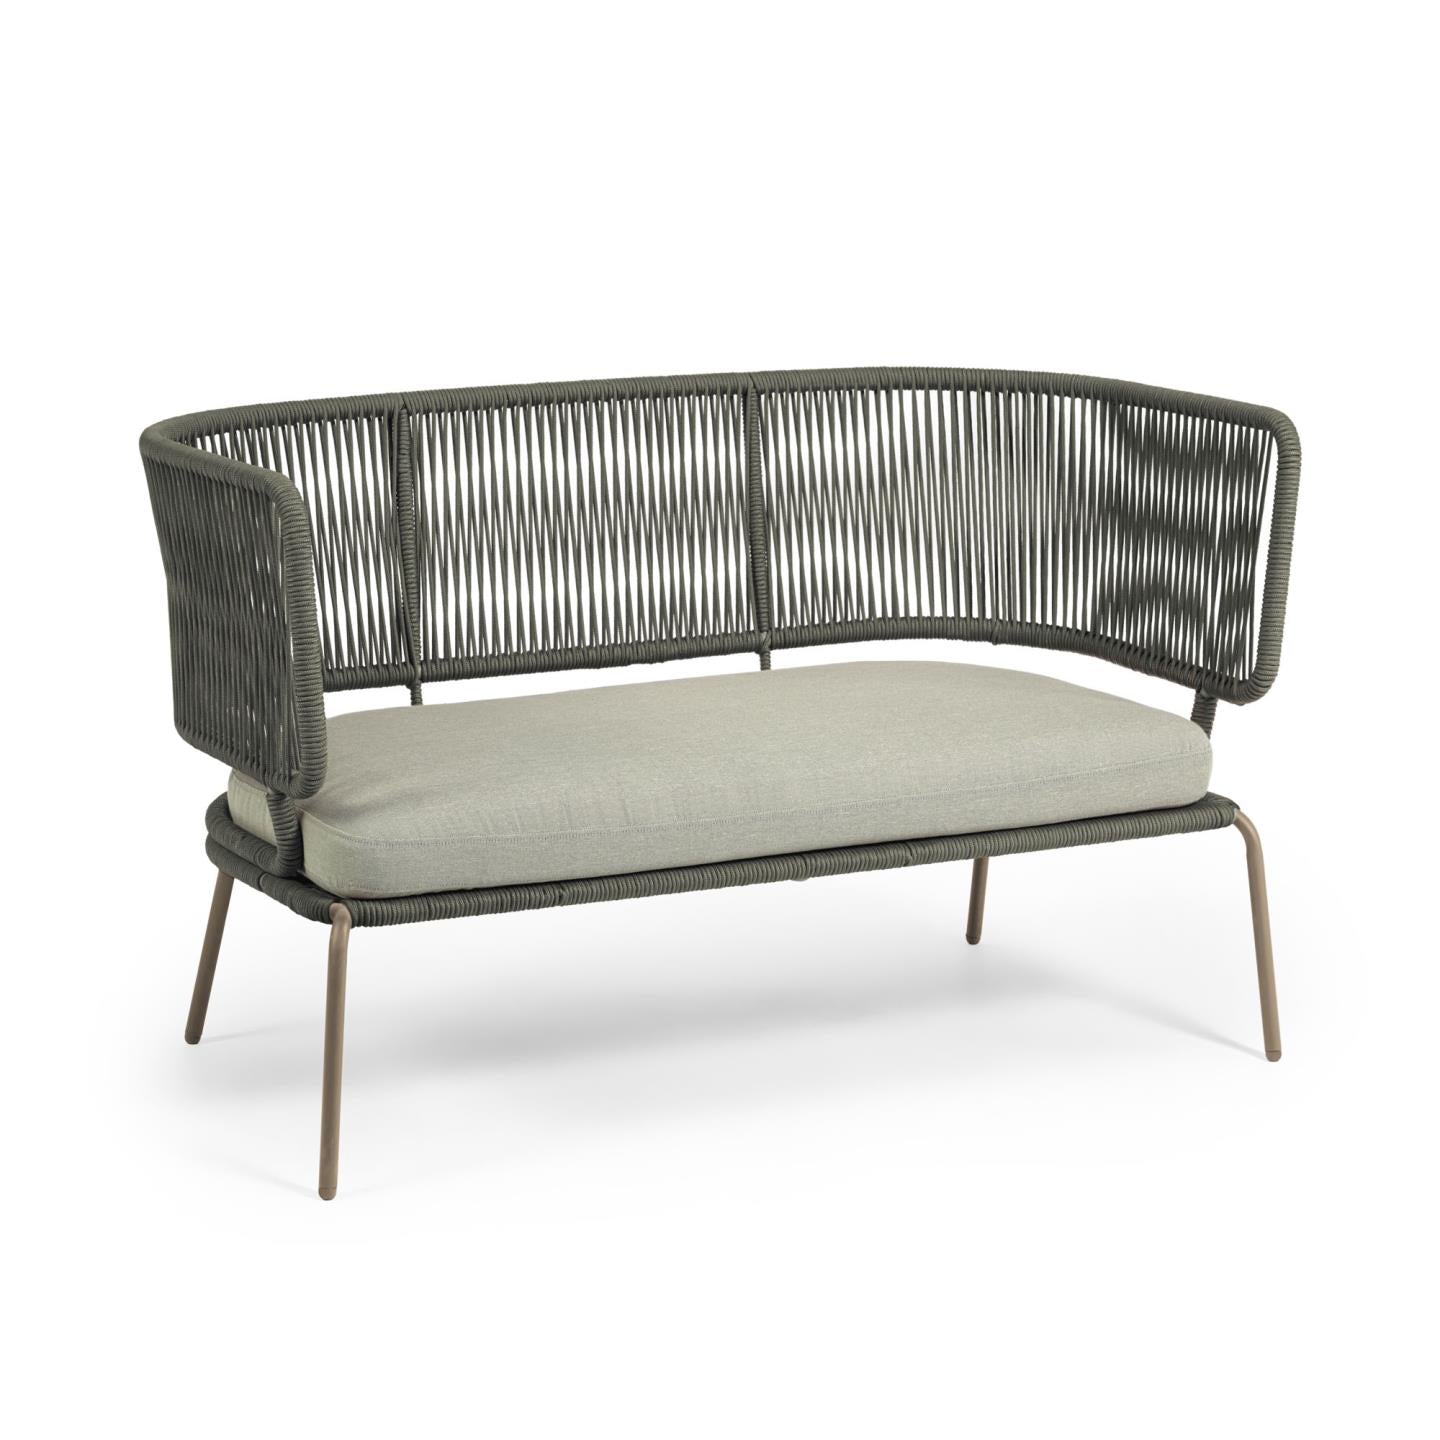 Nadin 2 seater sofa in green cord with galvanised steel legs, 135 cm